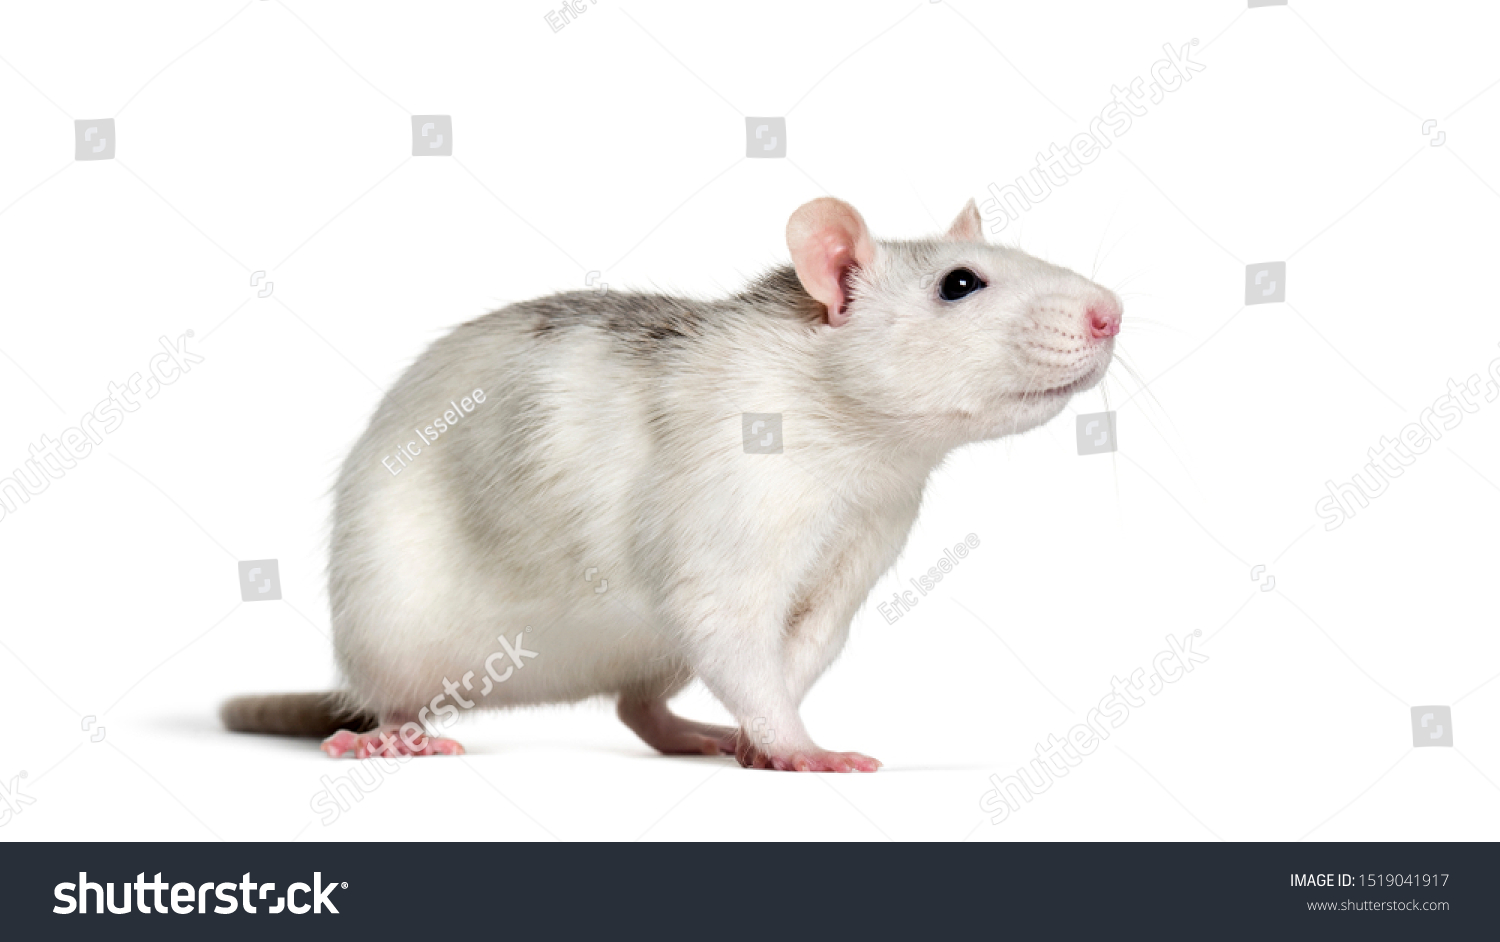 Domestic rat against white background #1519041917